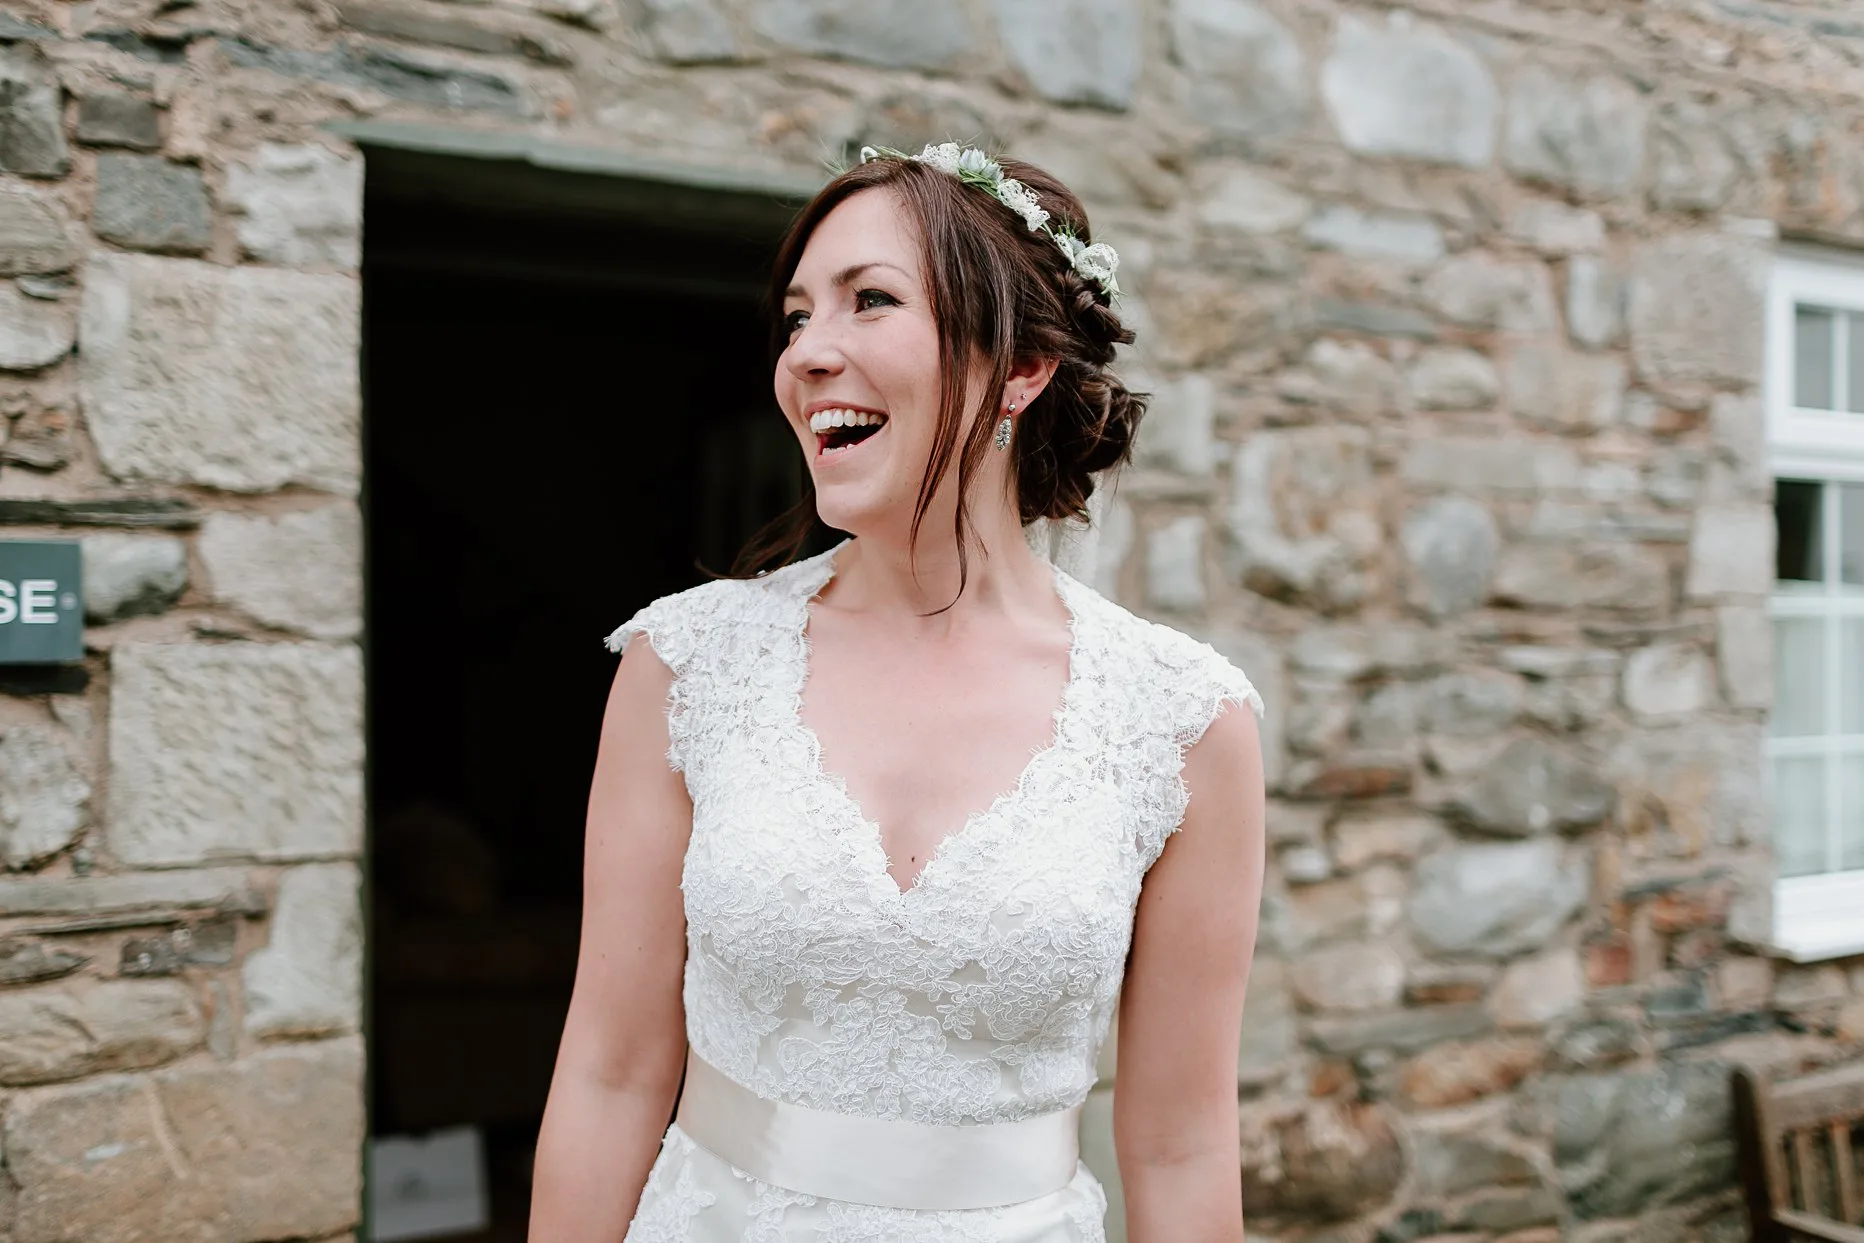 Bride dressed in boho lace wedding dress and flower crown stood outside of a stone bricked building. Bride is  laughing at something in the distance.